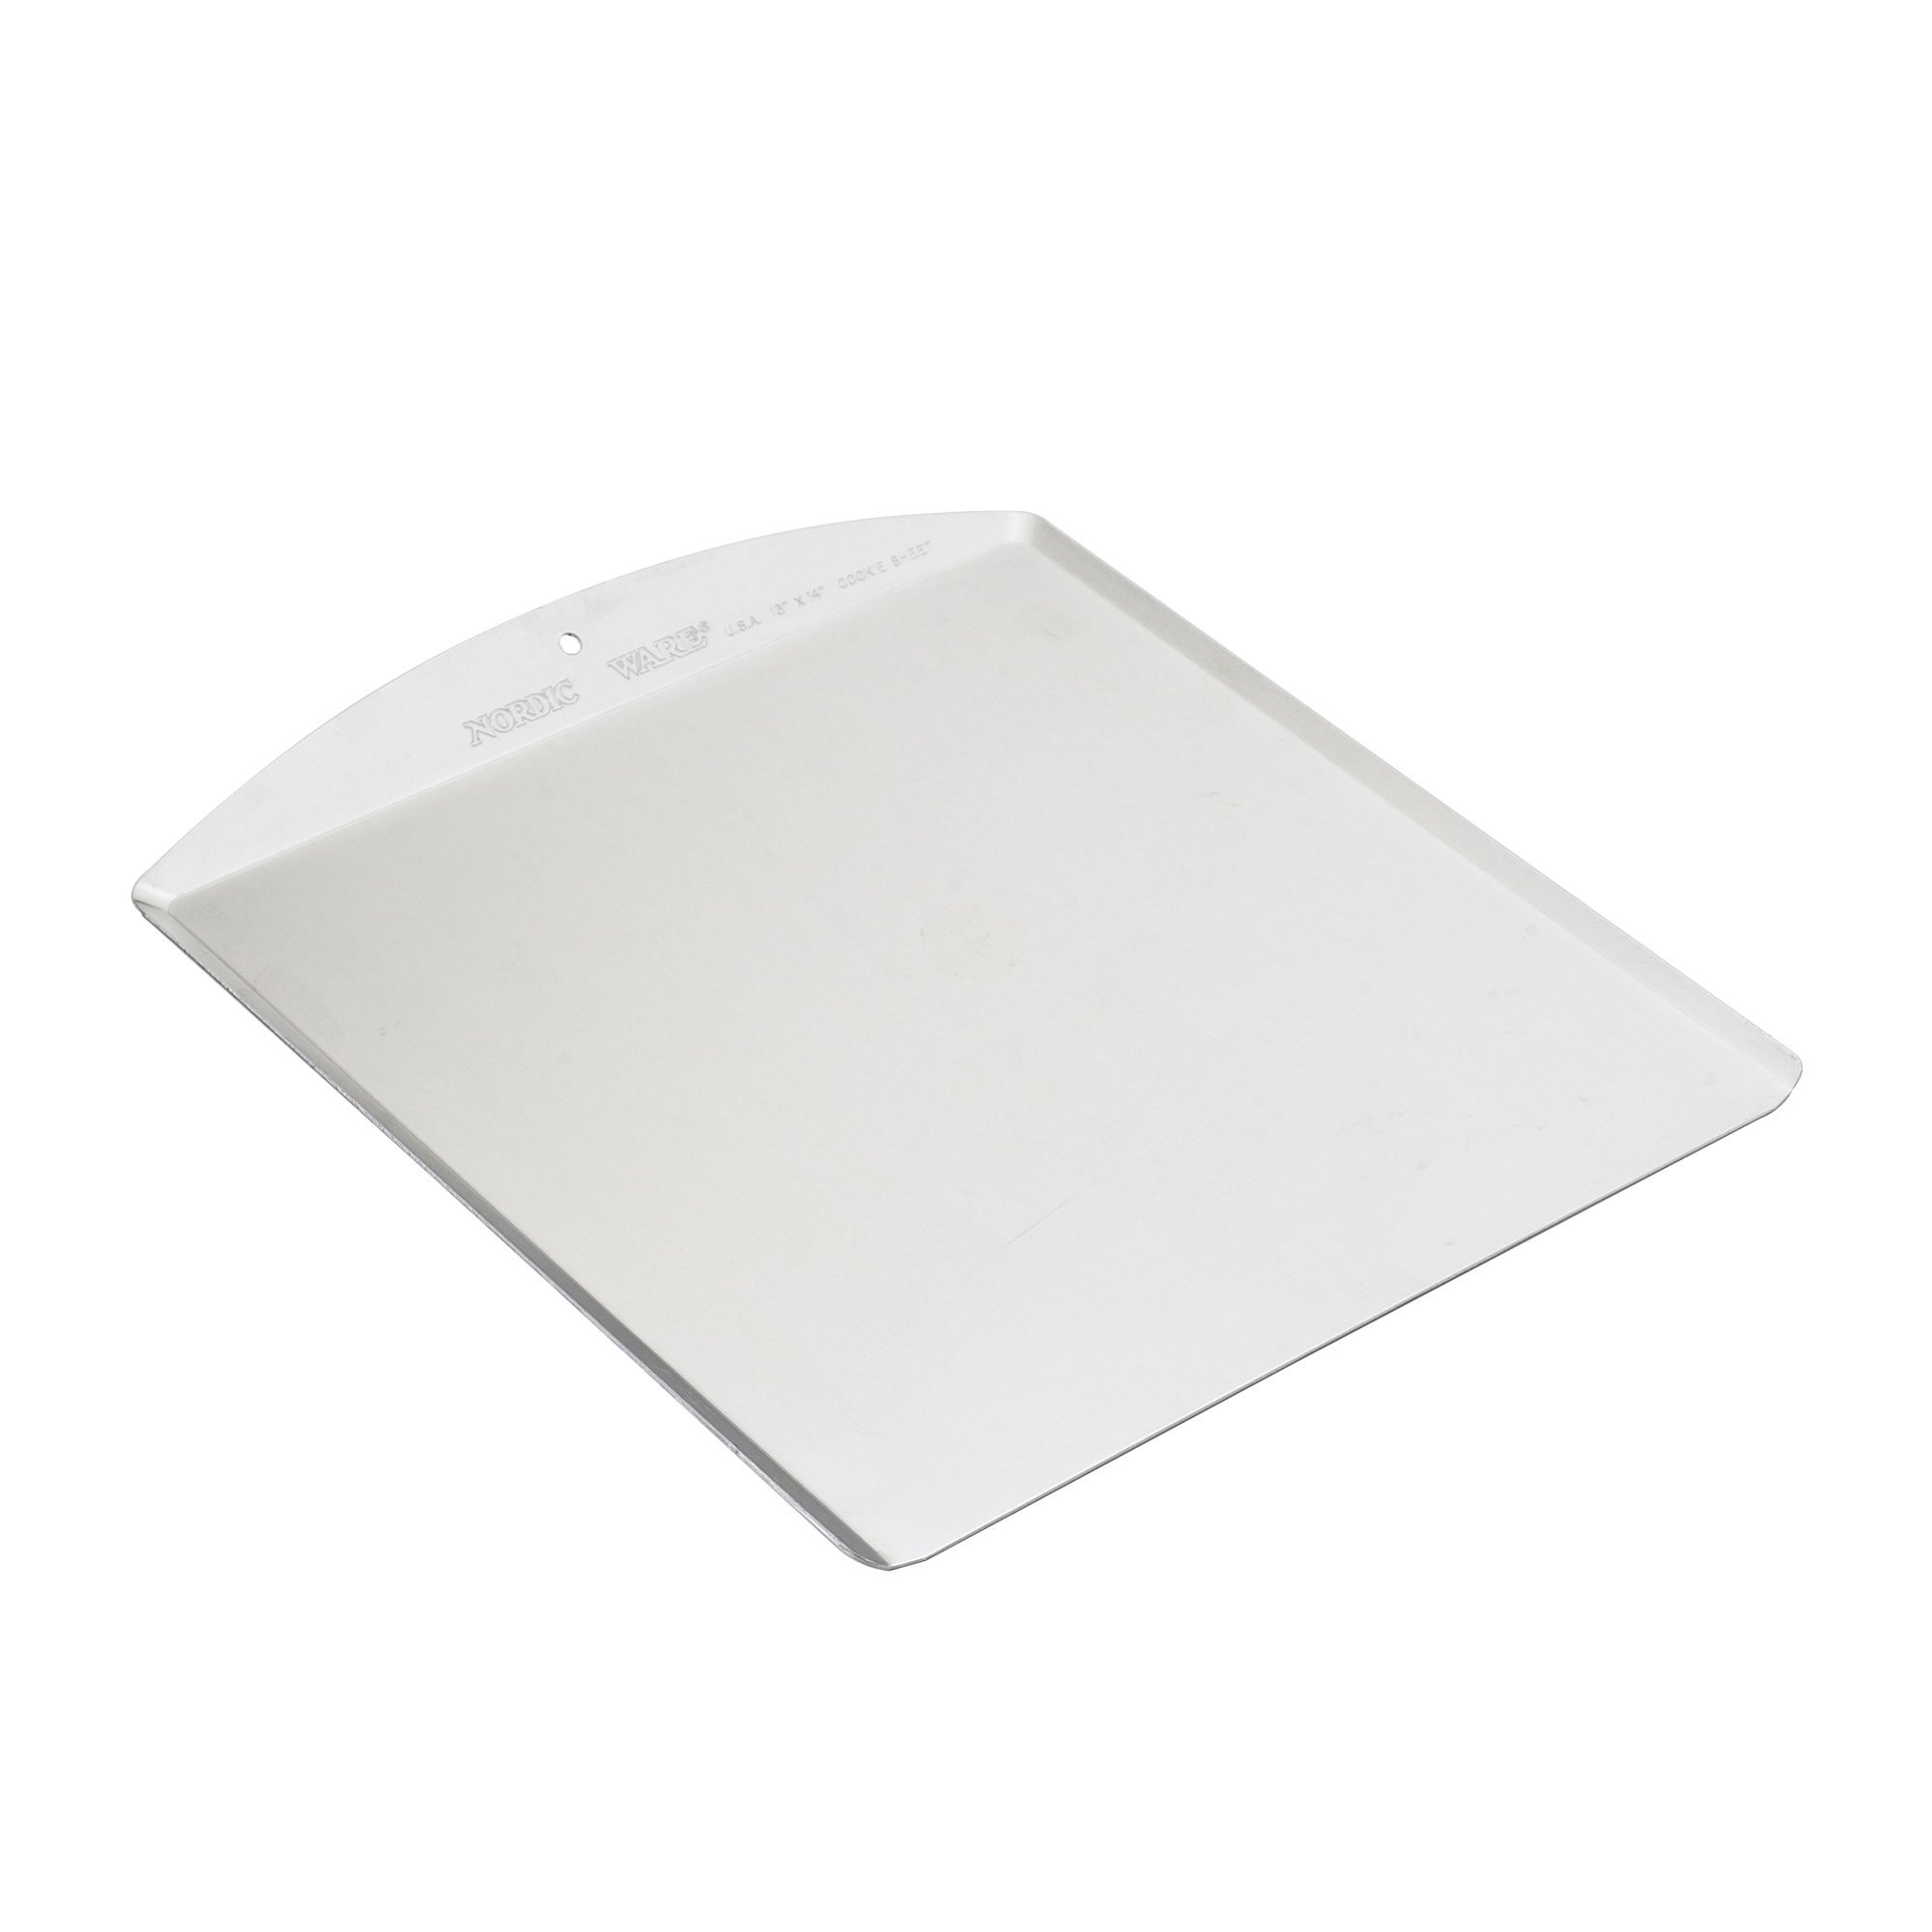 Nordic Ware Naturals Classic Cookie Sheet 40x35.5cm Image 1